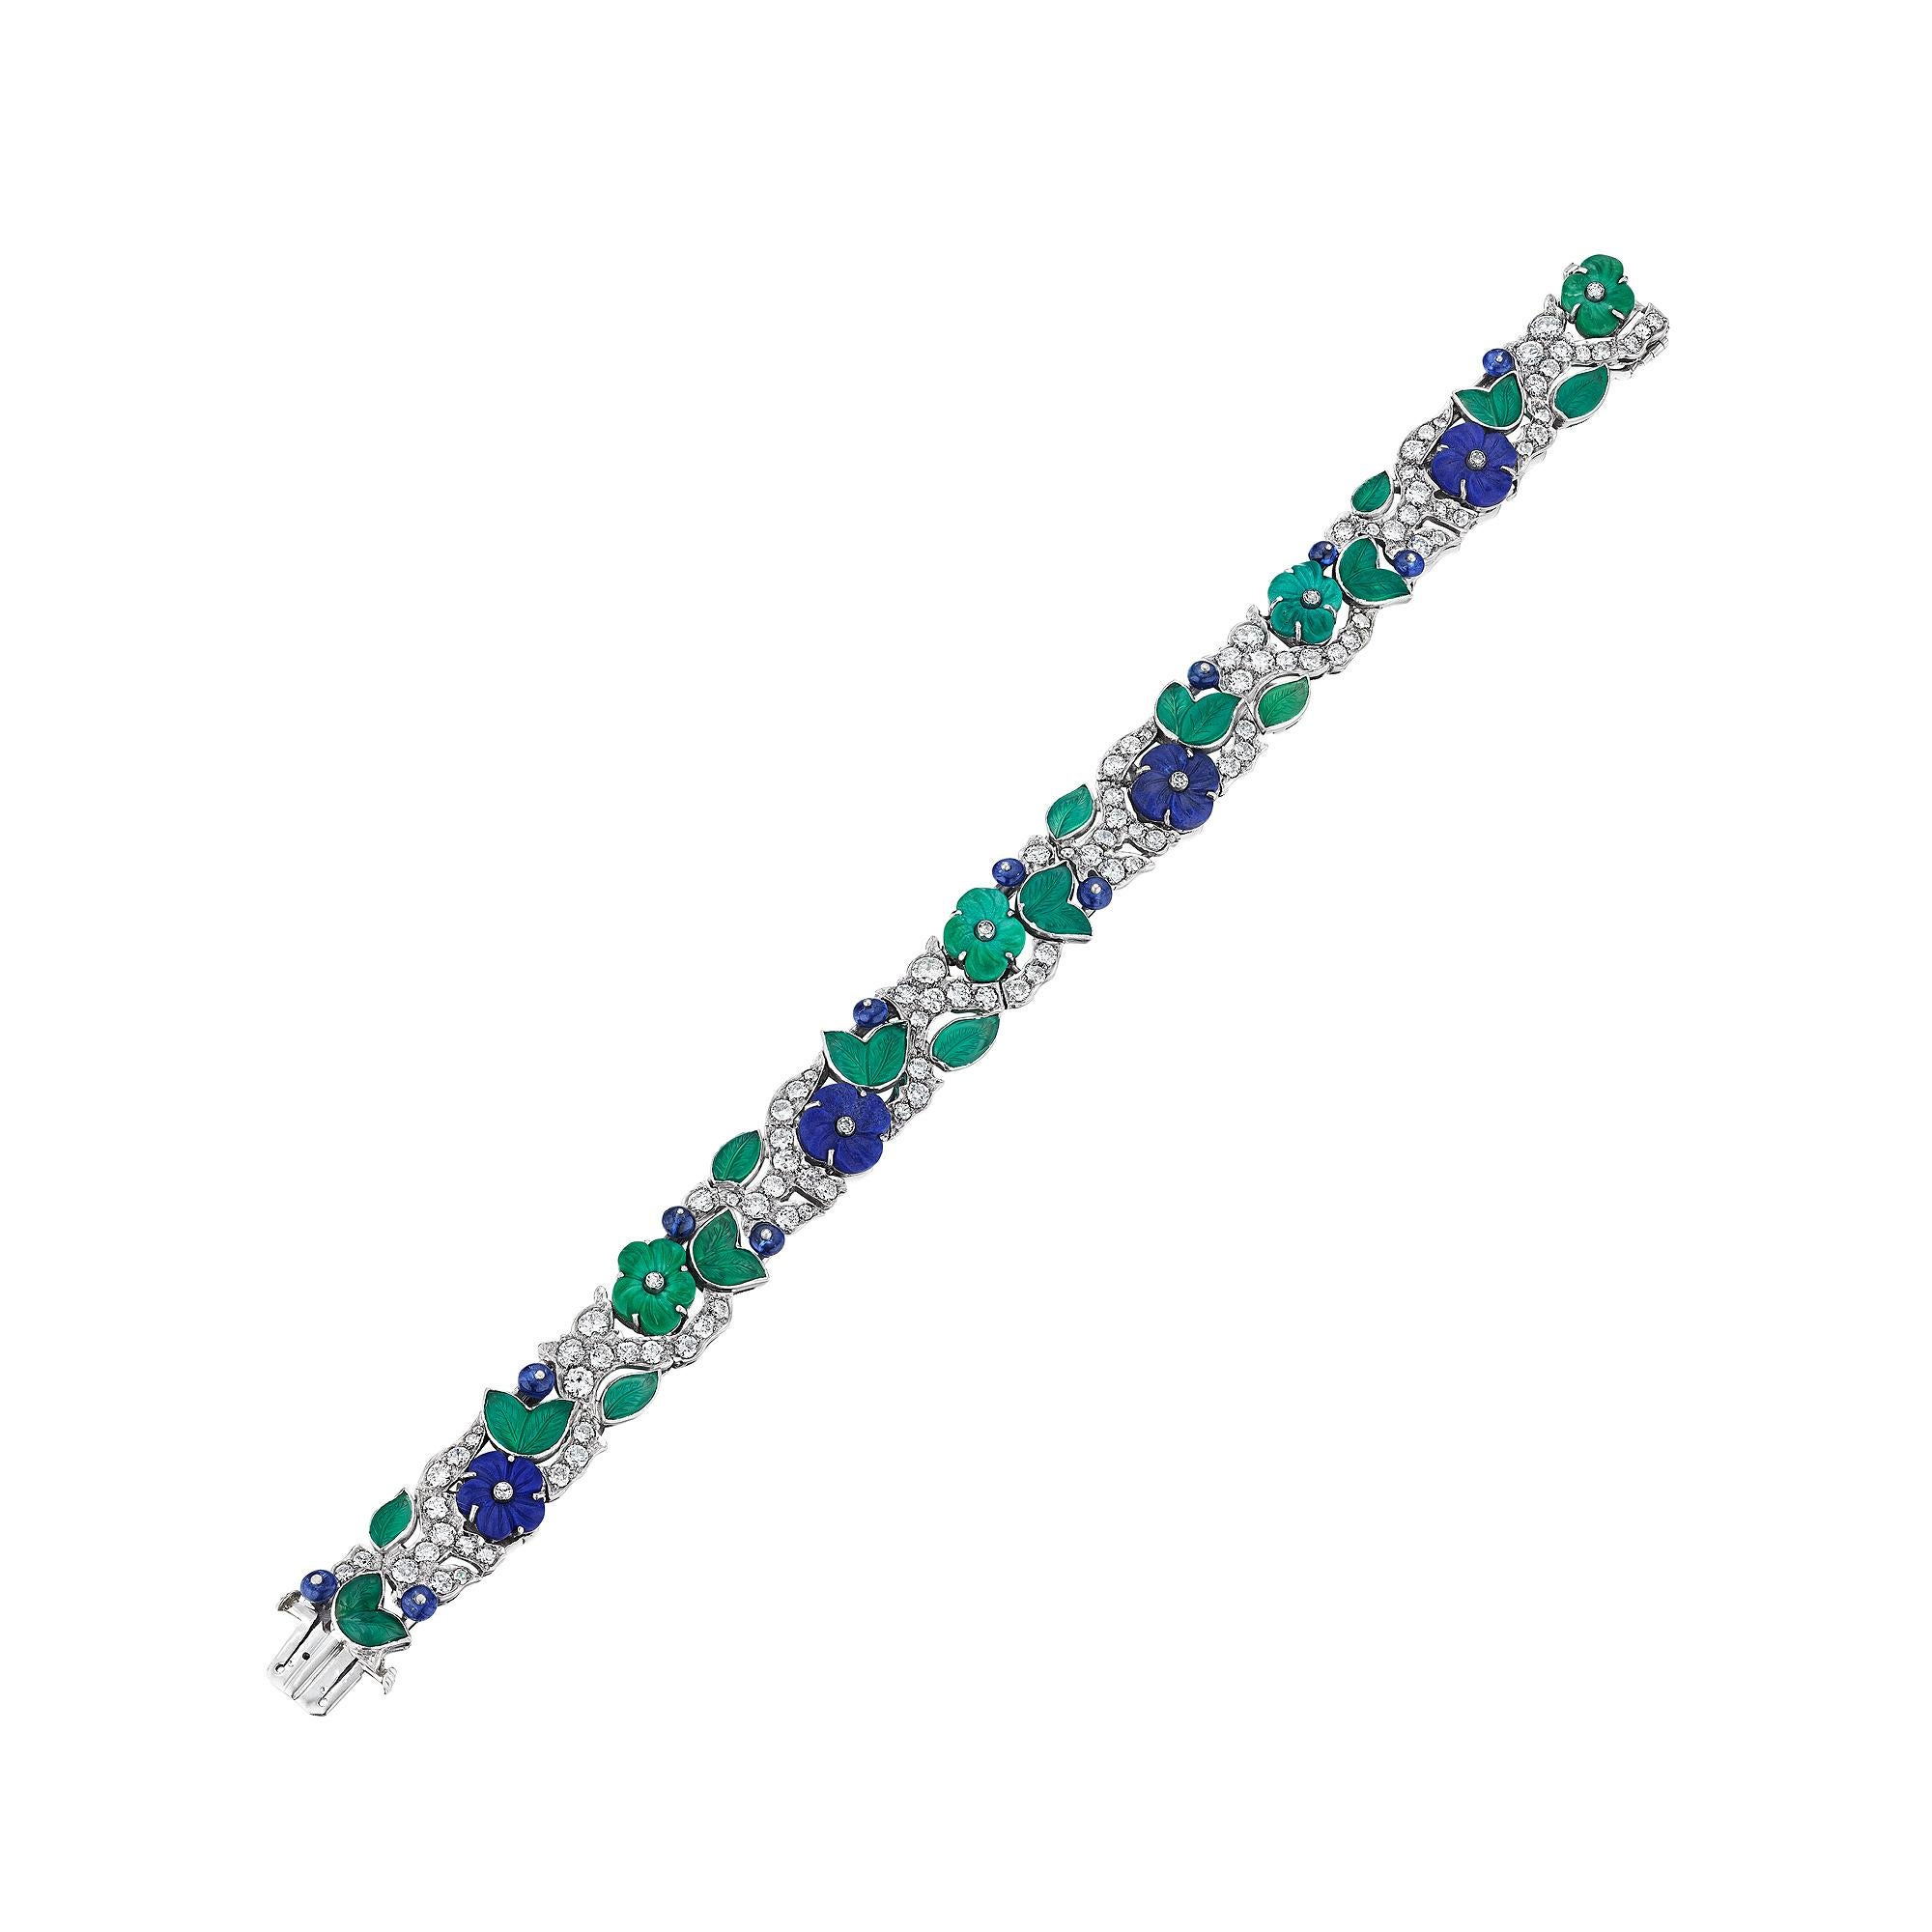 Bursting with joyful flowers, this Art Deco Charlton New York sapphire, diamond, lapis, and chalcedony bracelet is an everlasting garden party.  With carved sapphire beads, electric blue lapis and fresh green chalcedony flowers in full bloom, this